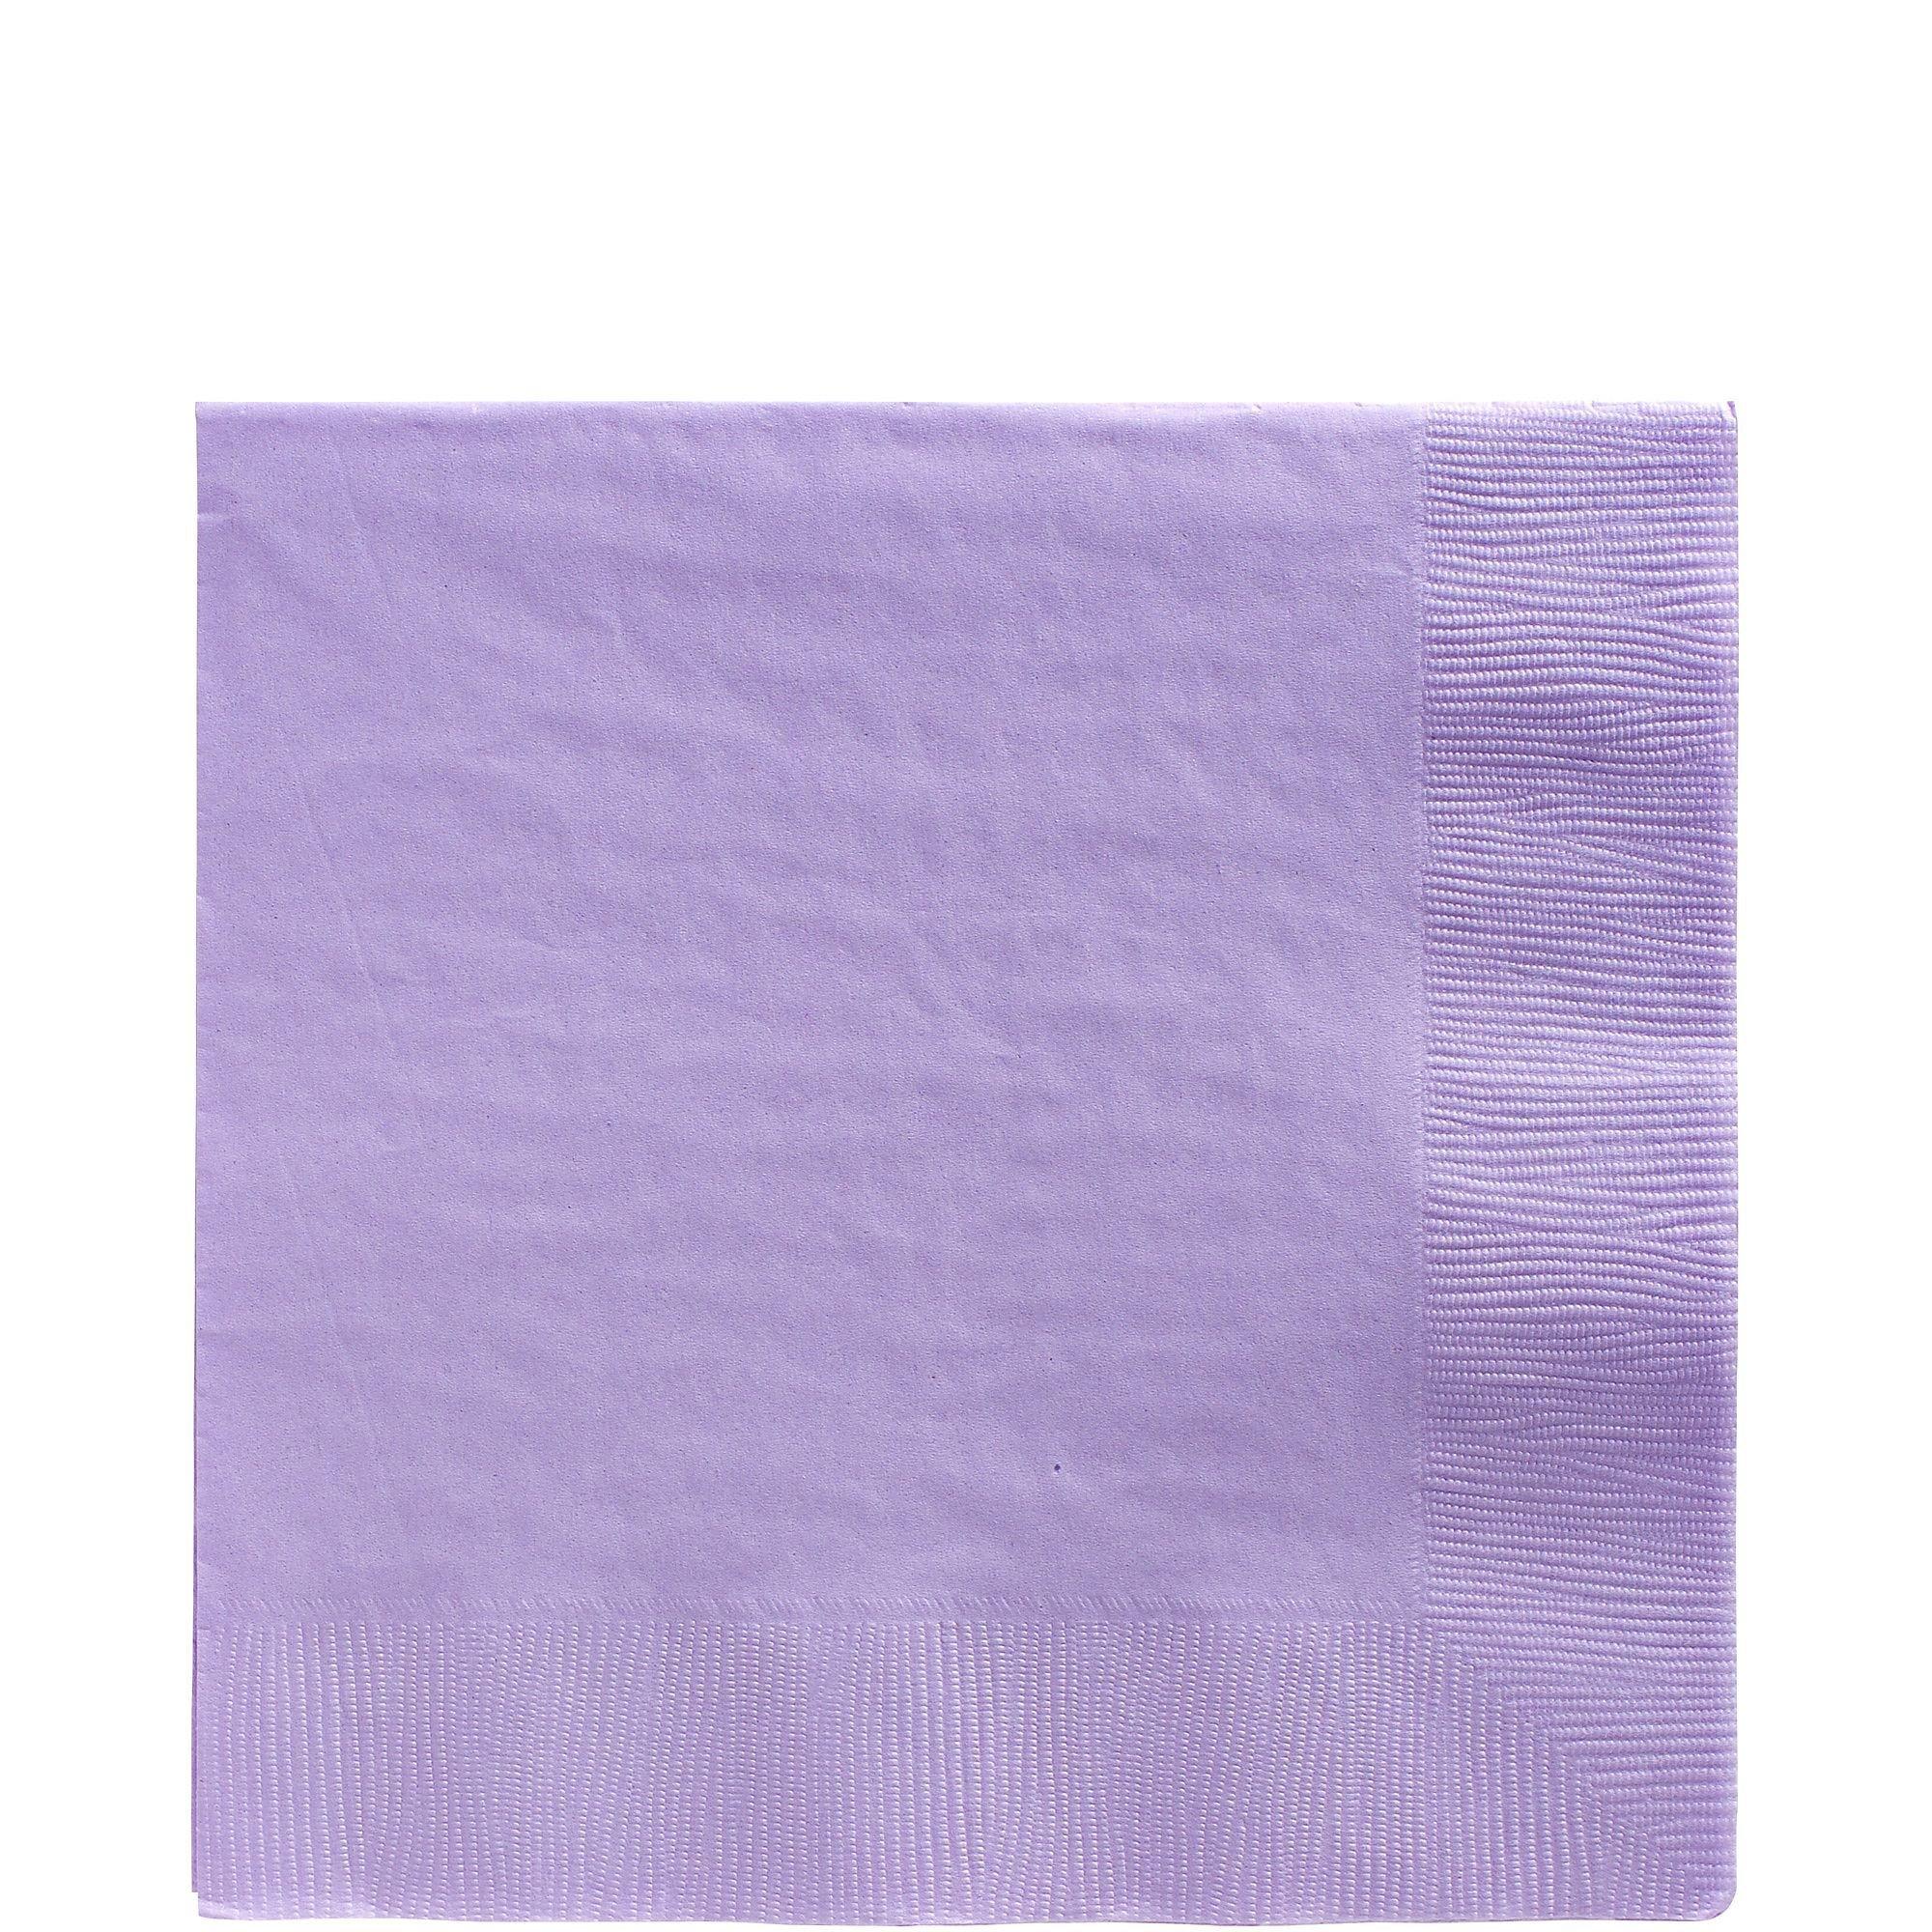 Soft Lavender Curly Tissue Paper Toss – Party Snobs